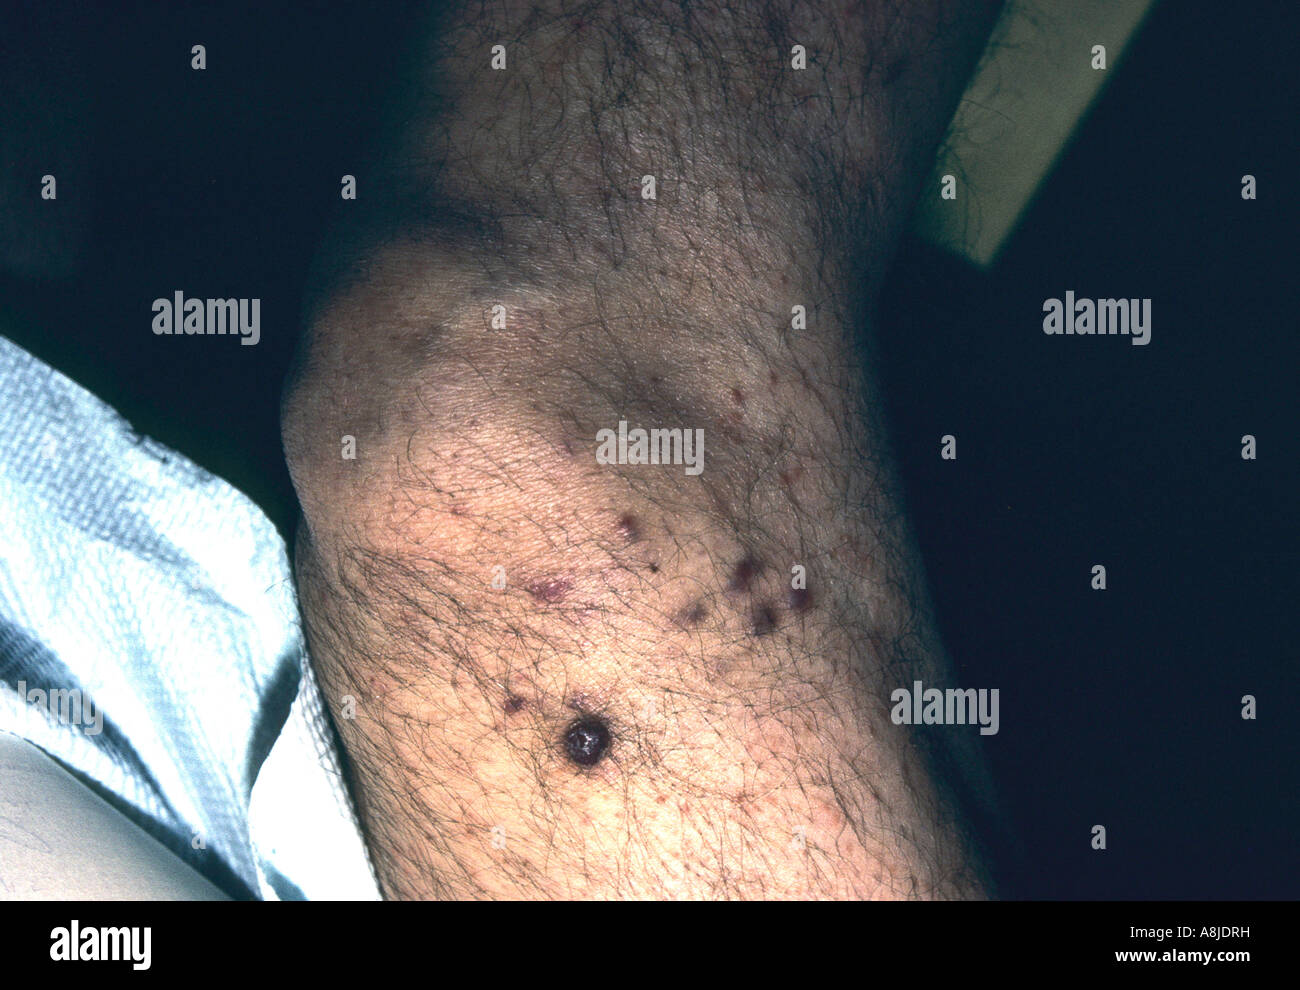 Close up photo of Kaposi sarcoma lesion on patient's foot/heal.This image may not be  model released due to non-recognizable pe Stock Photo